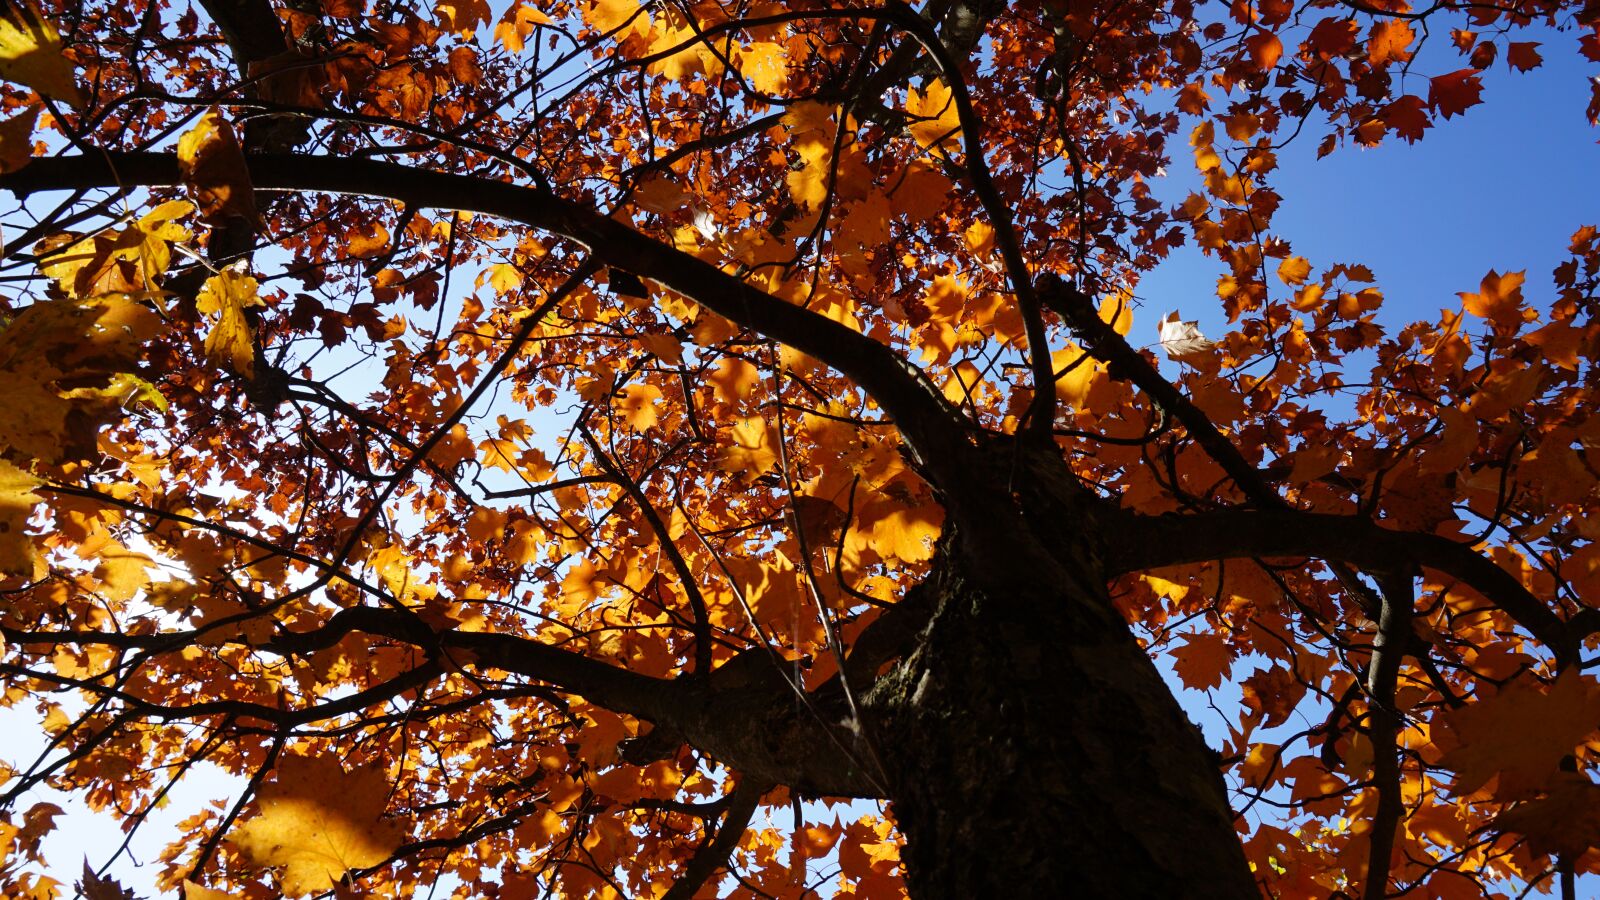 Sony a5100 sample photo. Autumn, trees, forest photography